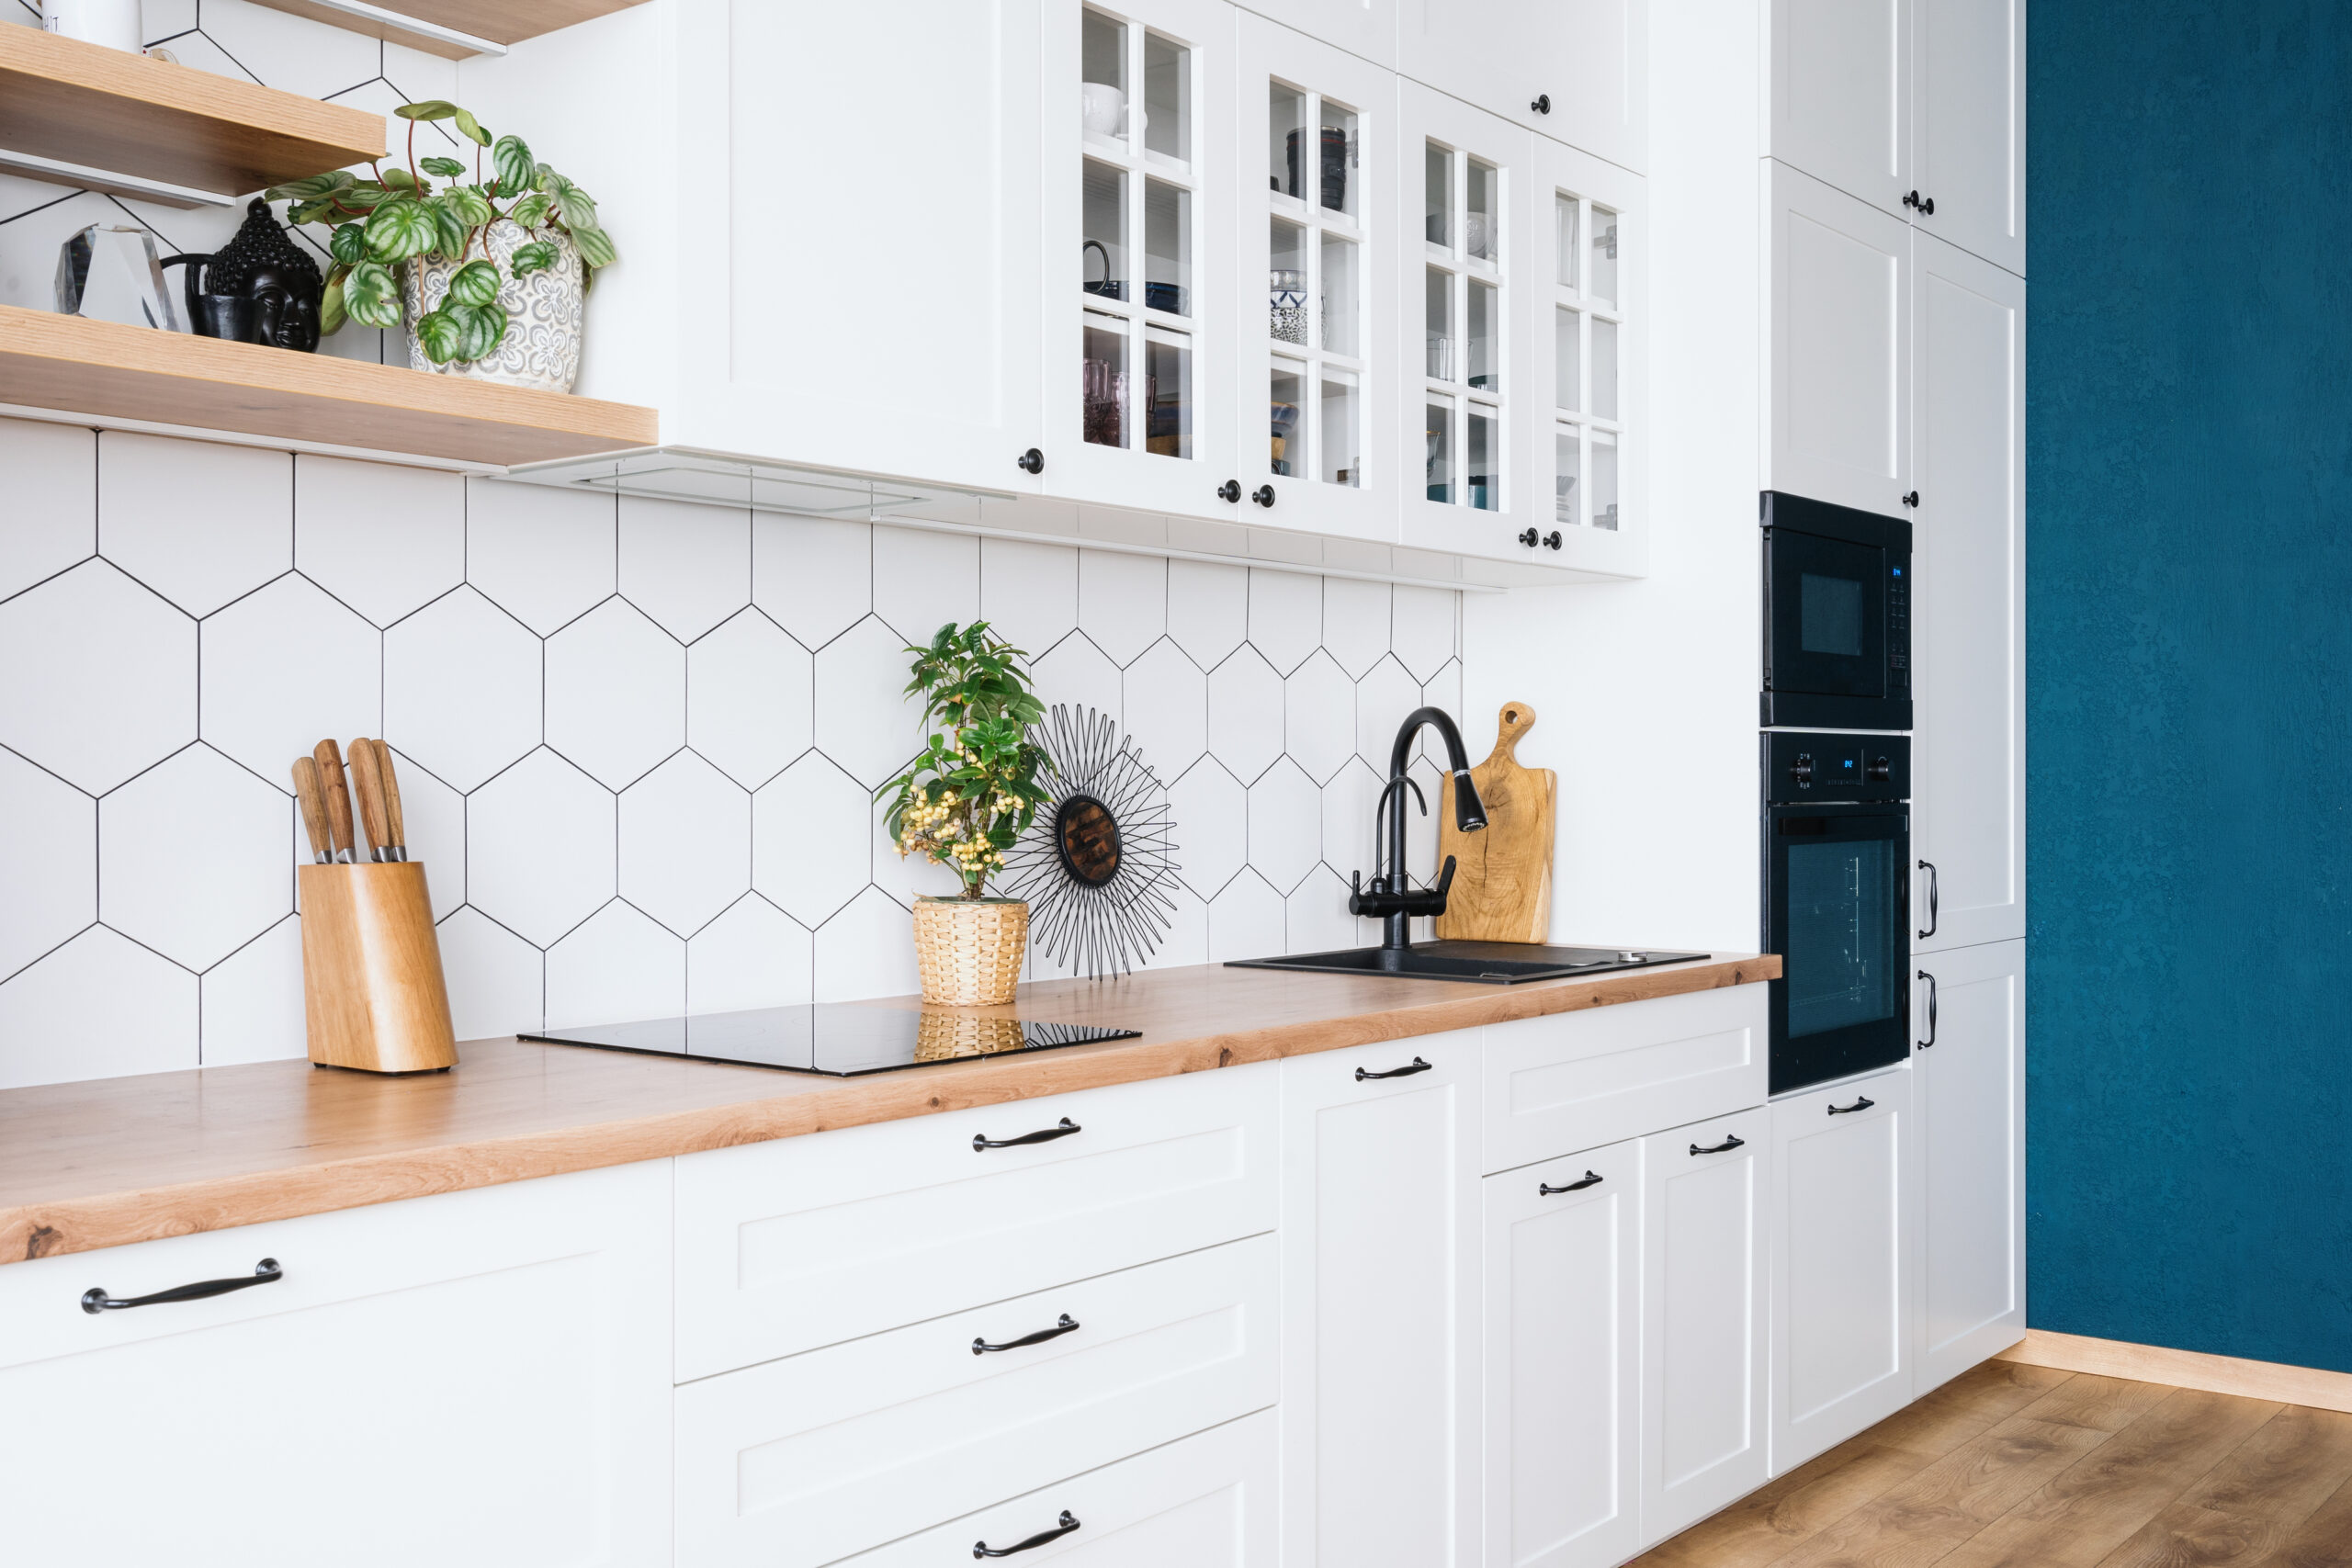 11 Rental Apartment Kitchen Decor Ideas That Are Just Too Good!